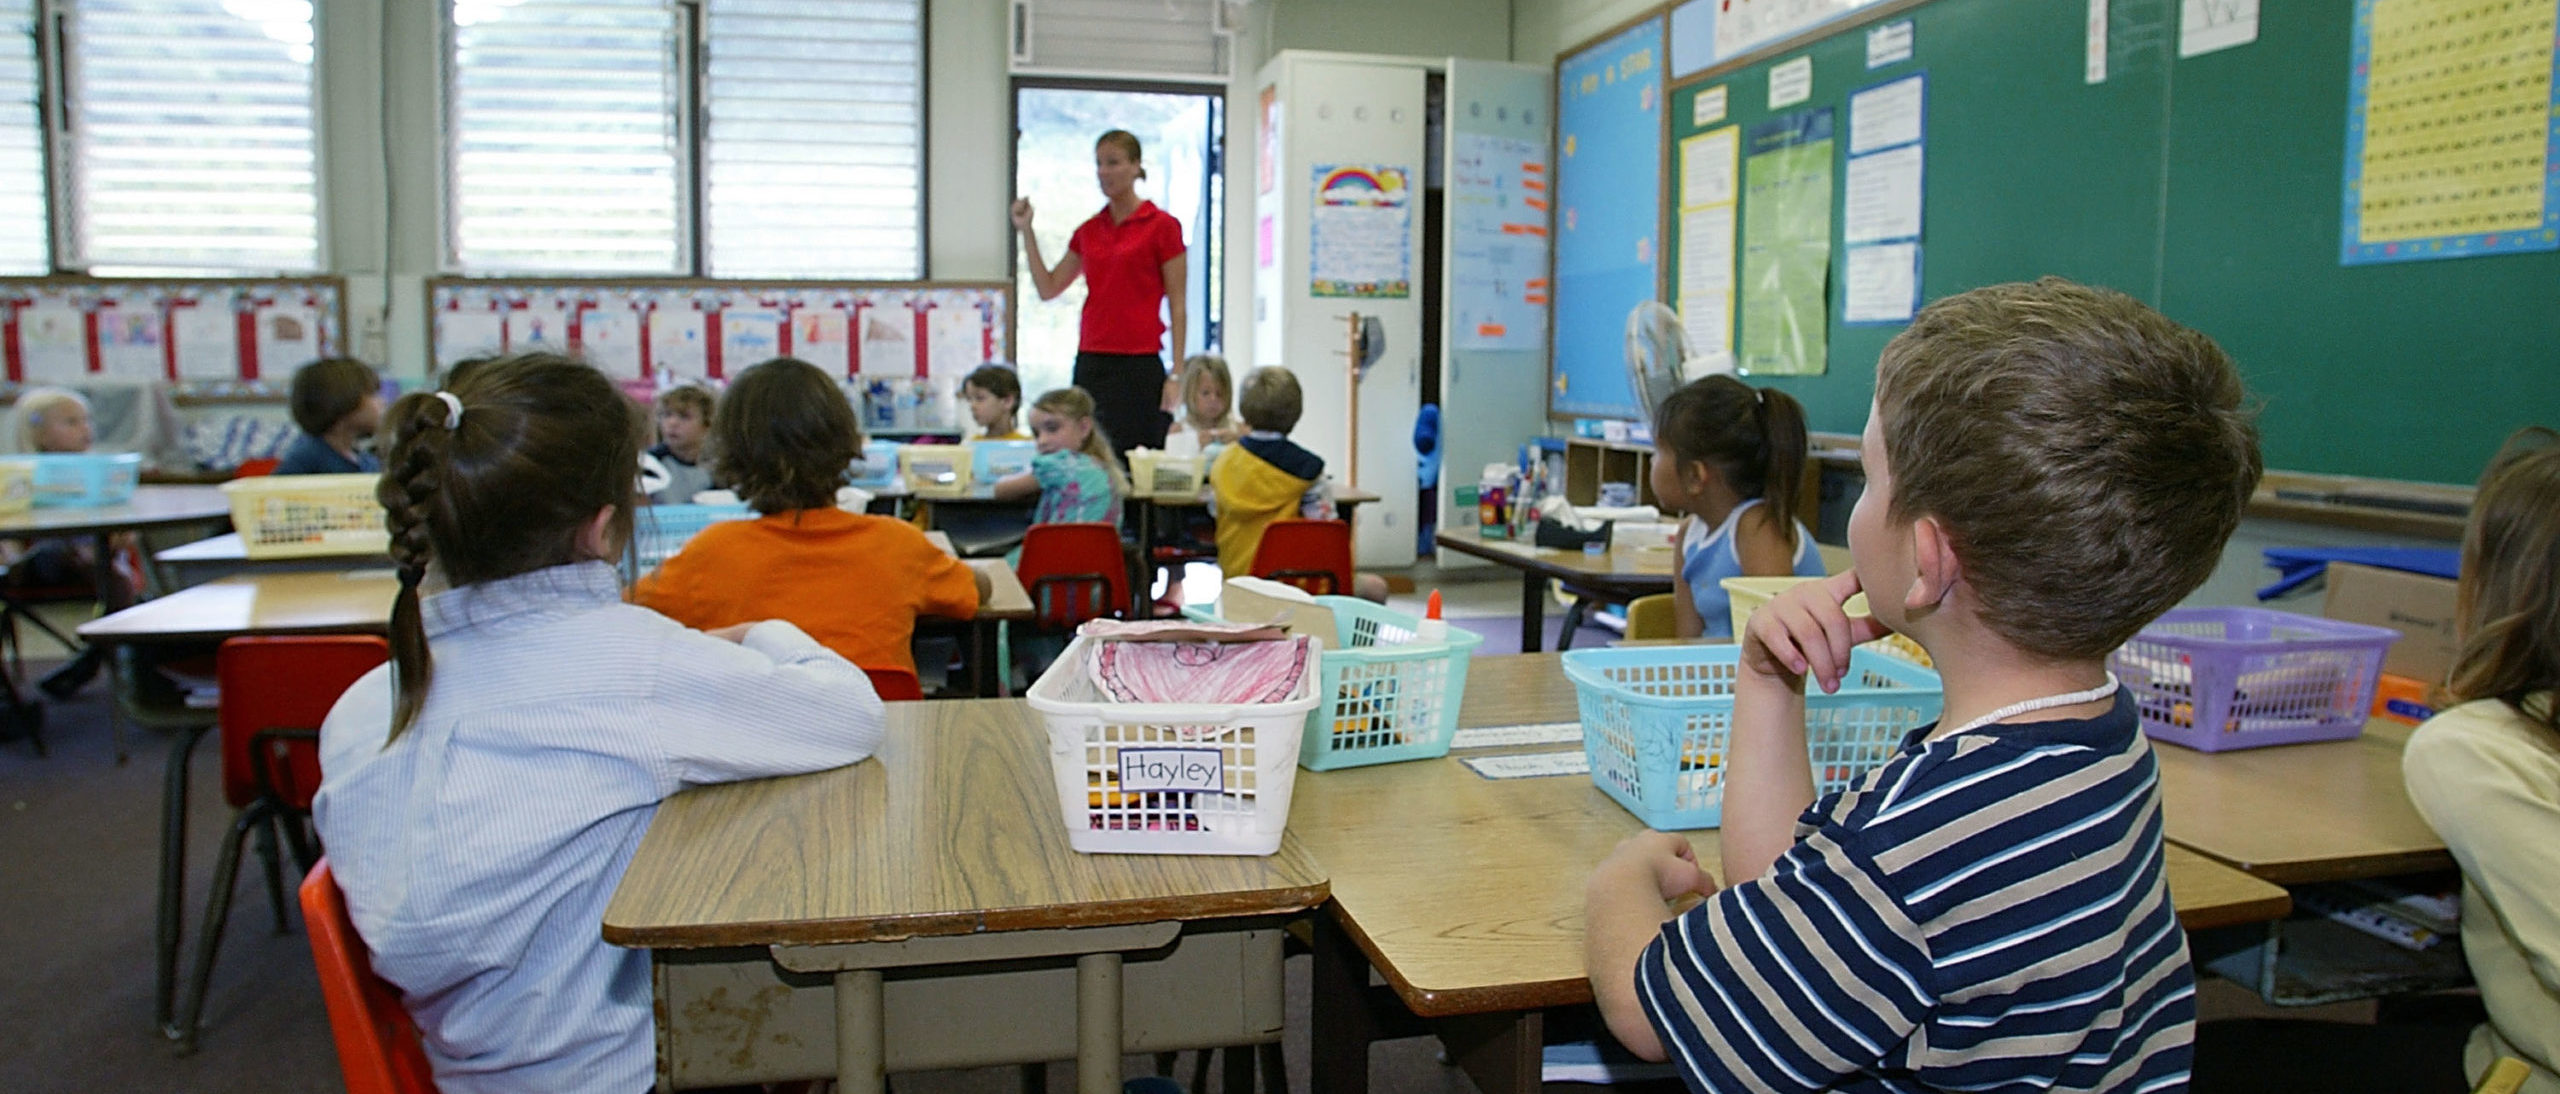 A kindergarten teacher prepares her students for a classroom lockdown drill February 18, 2003 in Oahu, Hawaii. Lockdown procedure is used to protect school children from possible threats on campus such as intruders, terrorism or military attack. (Photo by Phil Mislinski/Getty Images)